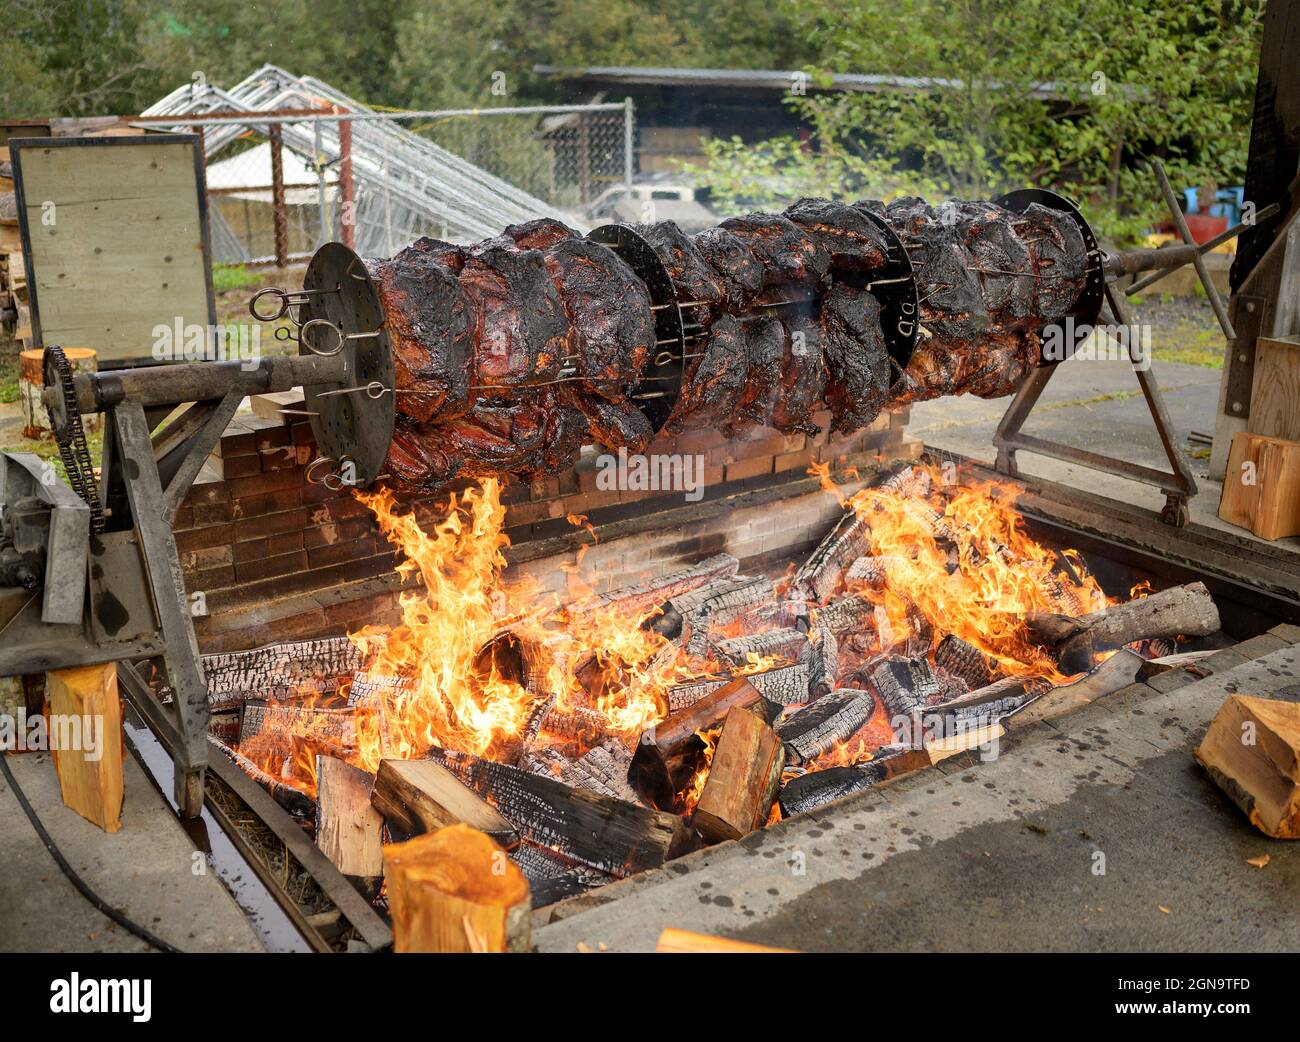 Eight hundred pounds of beef skewered on a custom made motor driven spit barbecue on an open flame fire pit.  Festival barbecue stand. Stock Photo